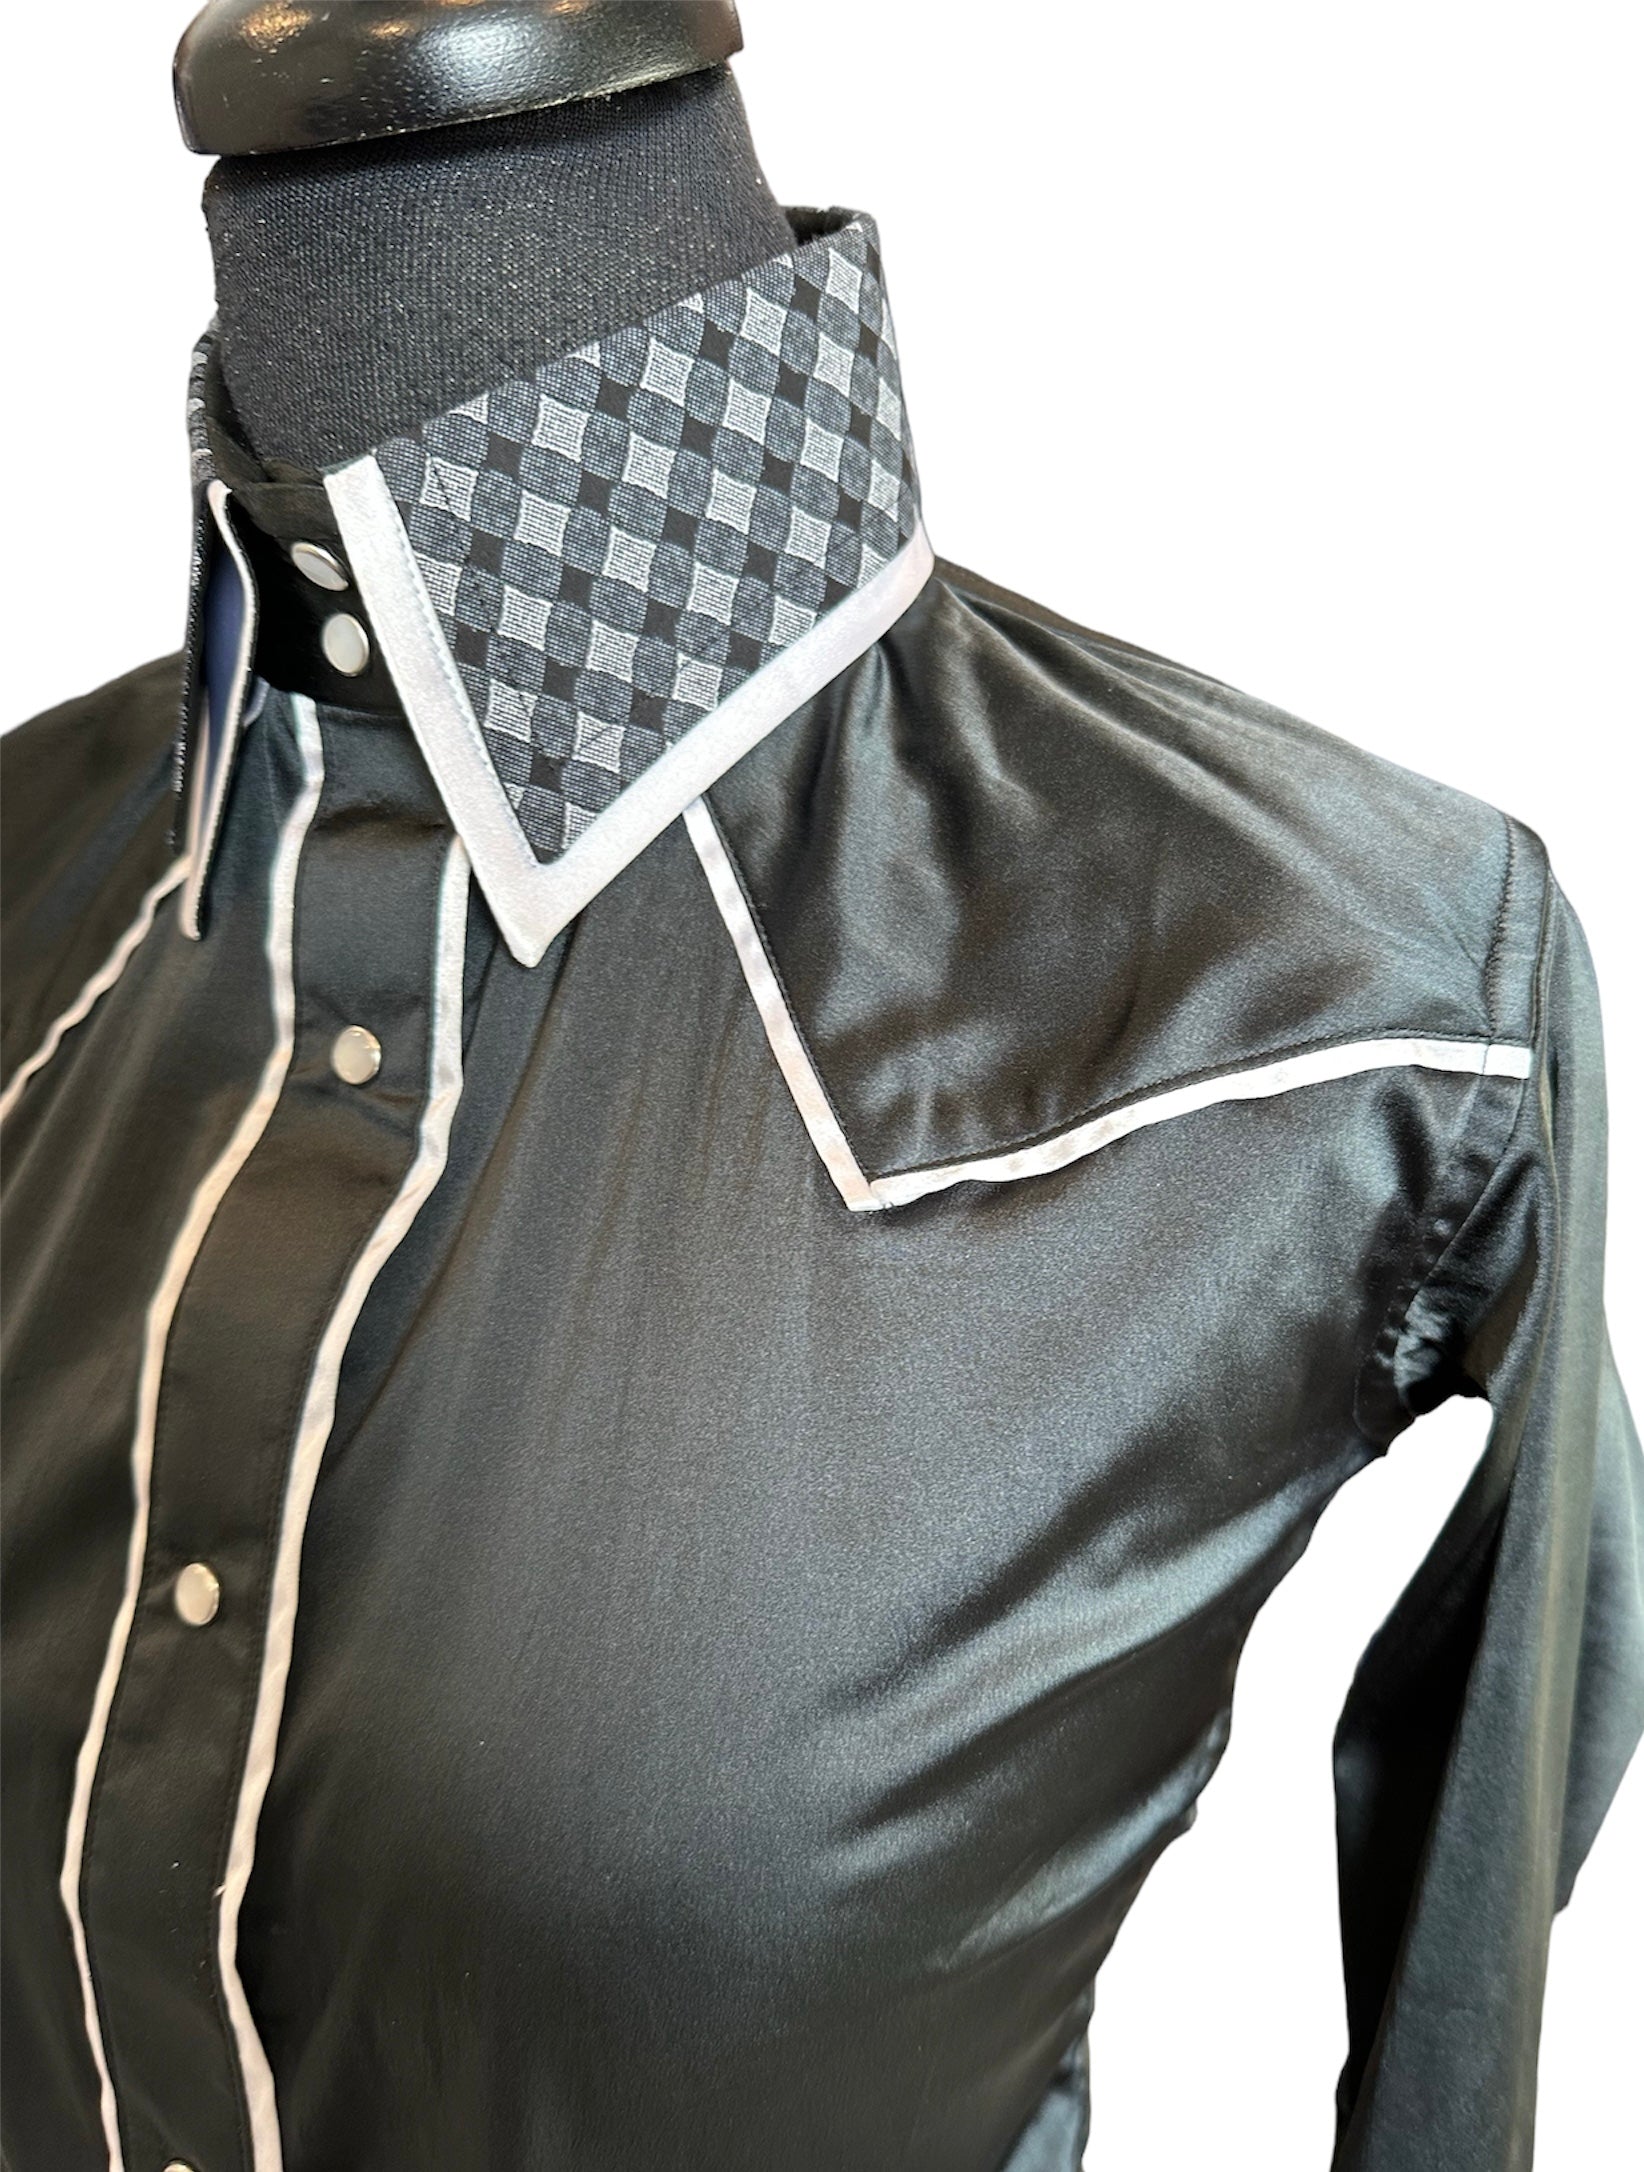 Stretch Satin Ranch Shirt Black and White with Plaid Accents